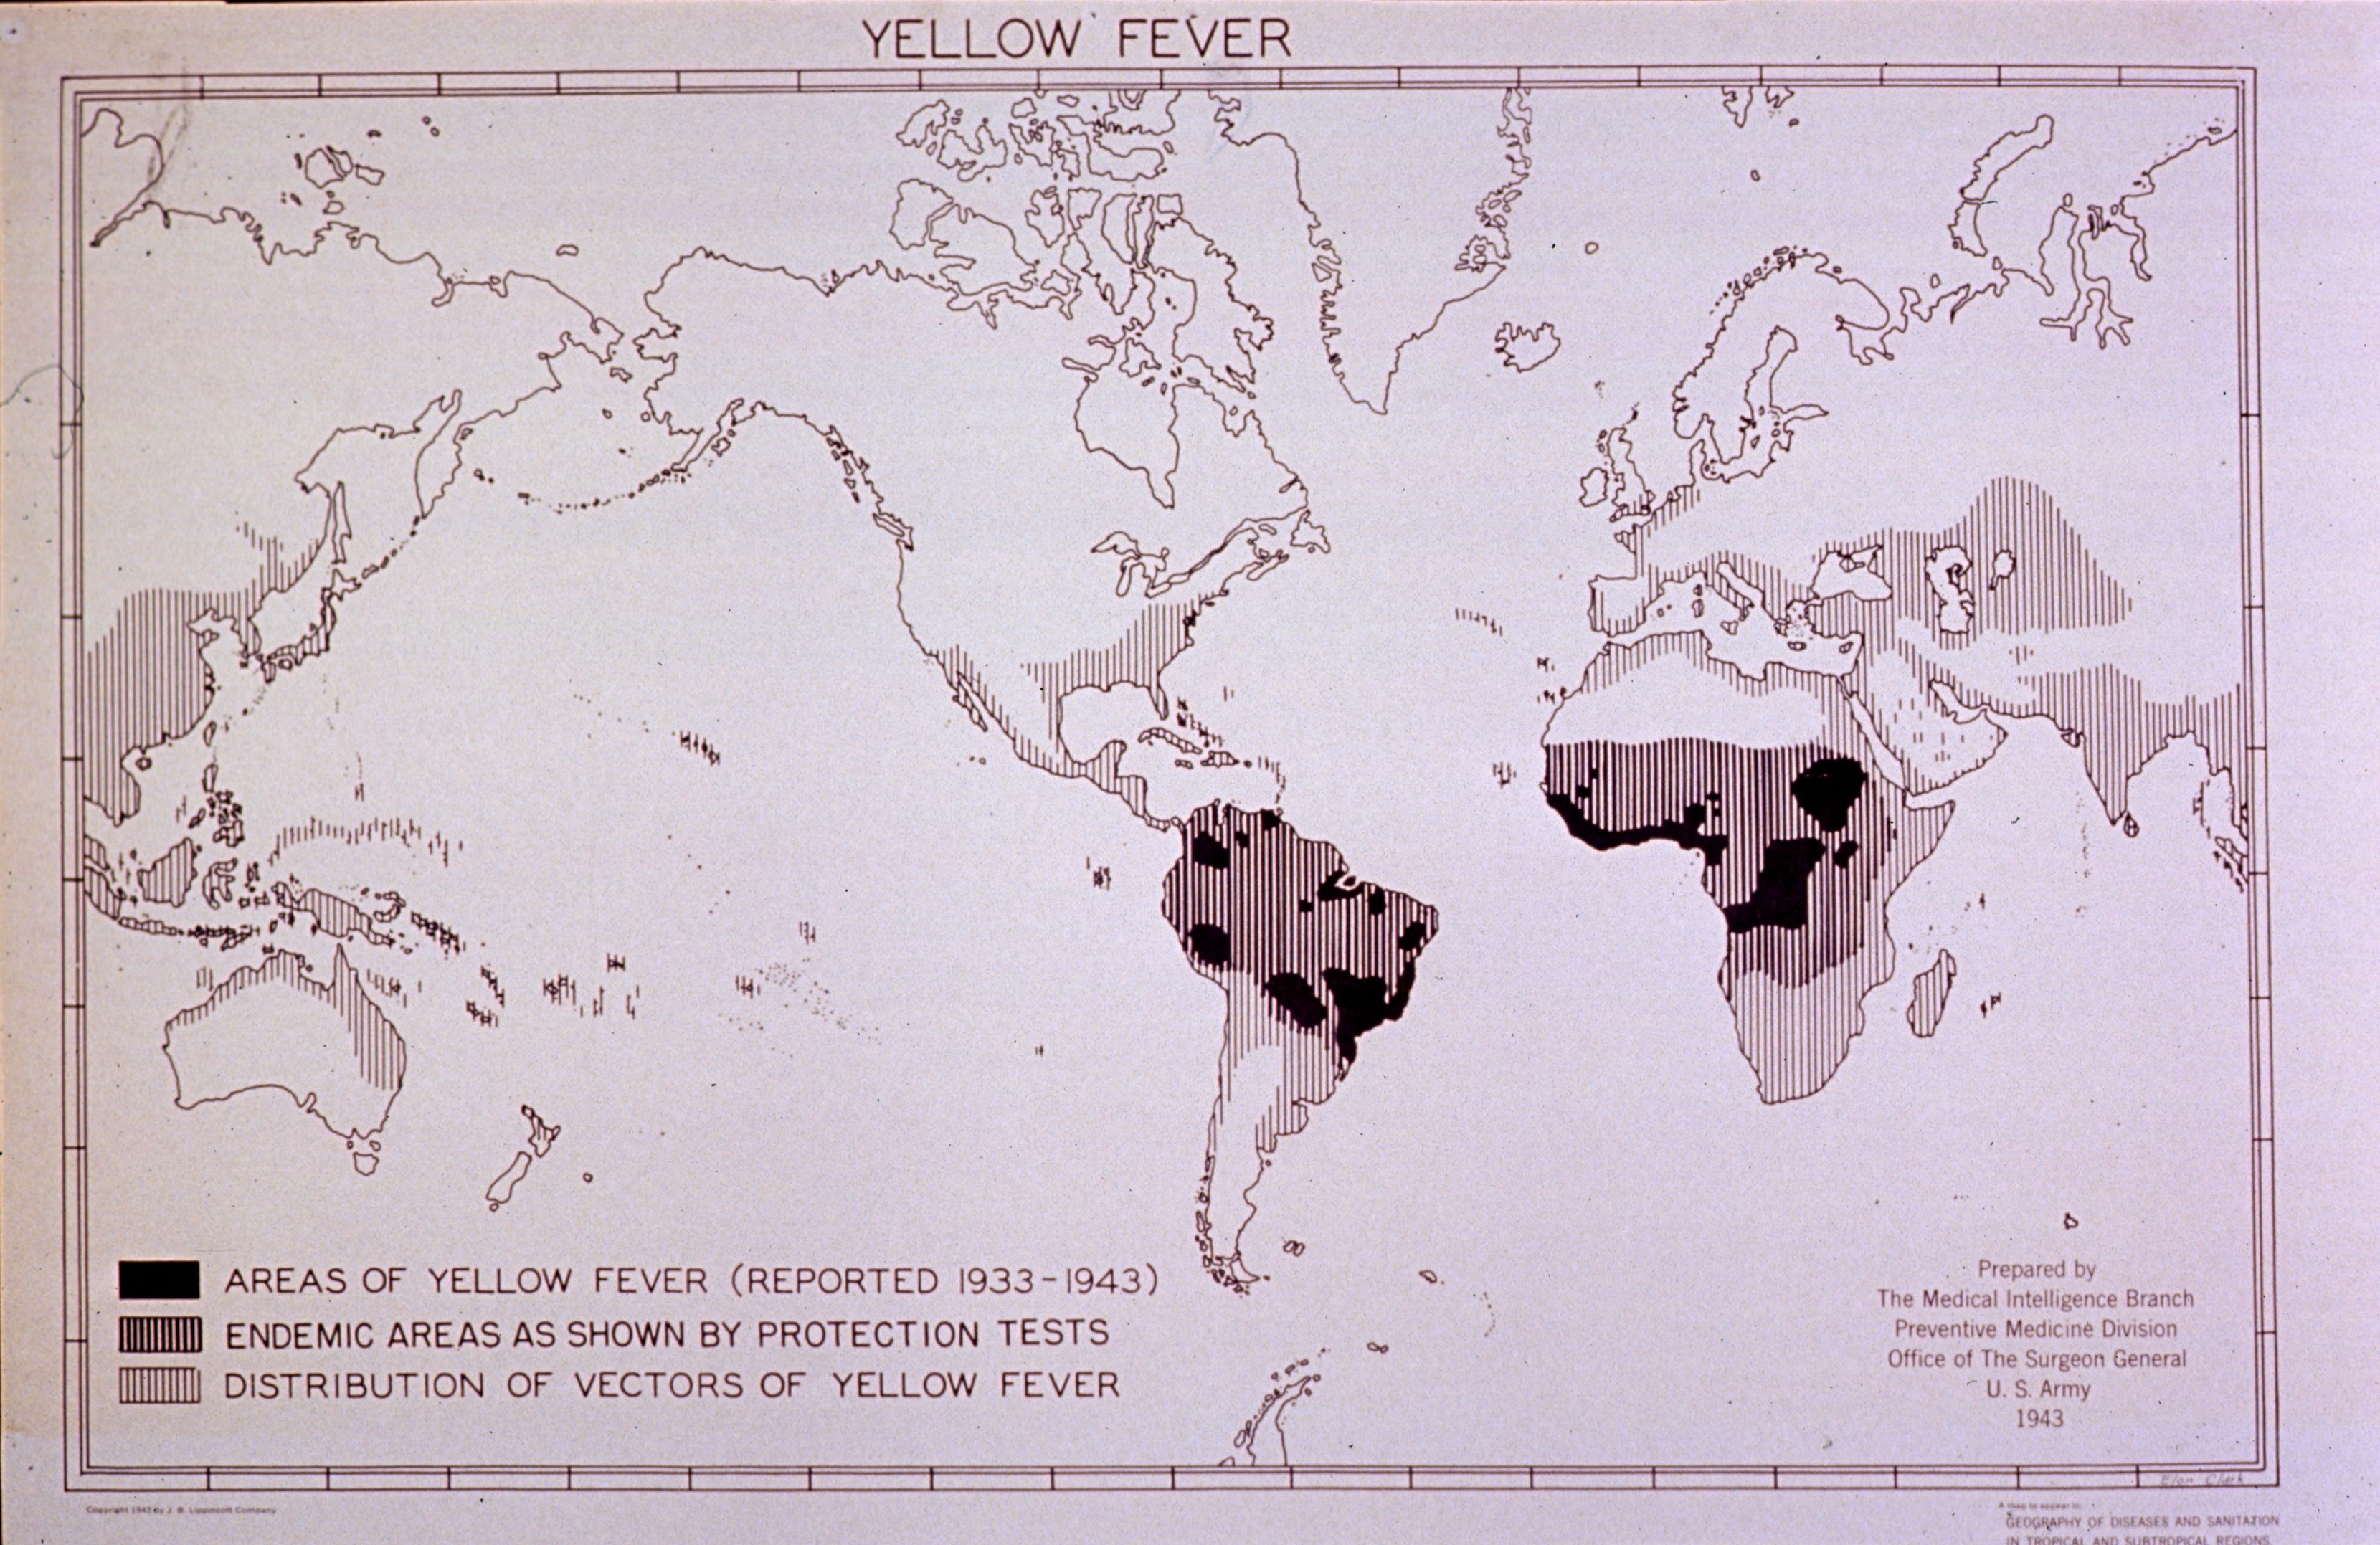 Old map showing areas of yellow fever from 1933-1943, endemic areas as shown by protection tests, and distribution of vectors of yellow fever